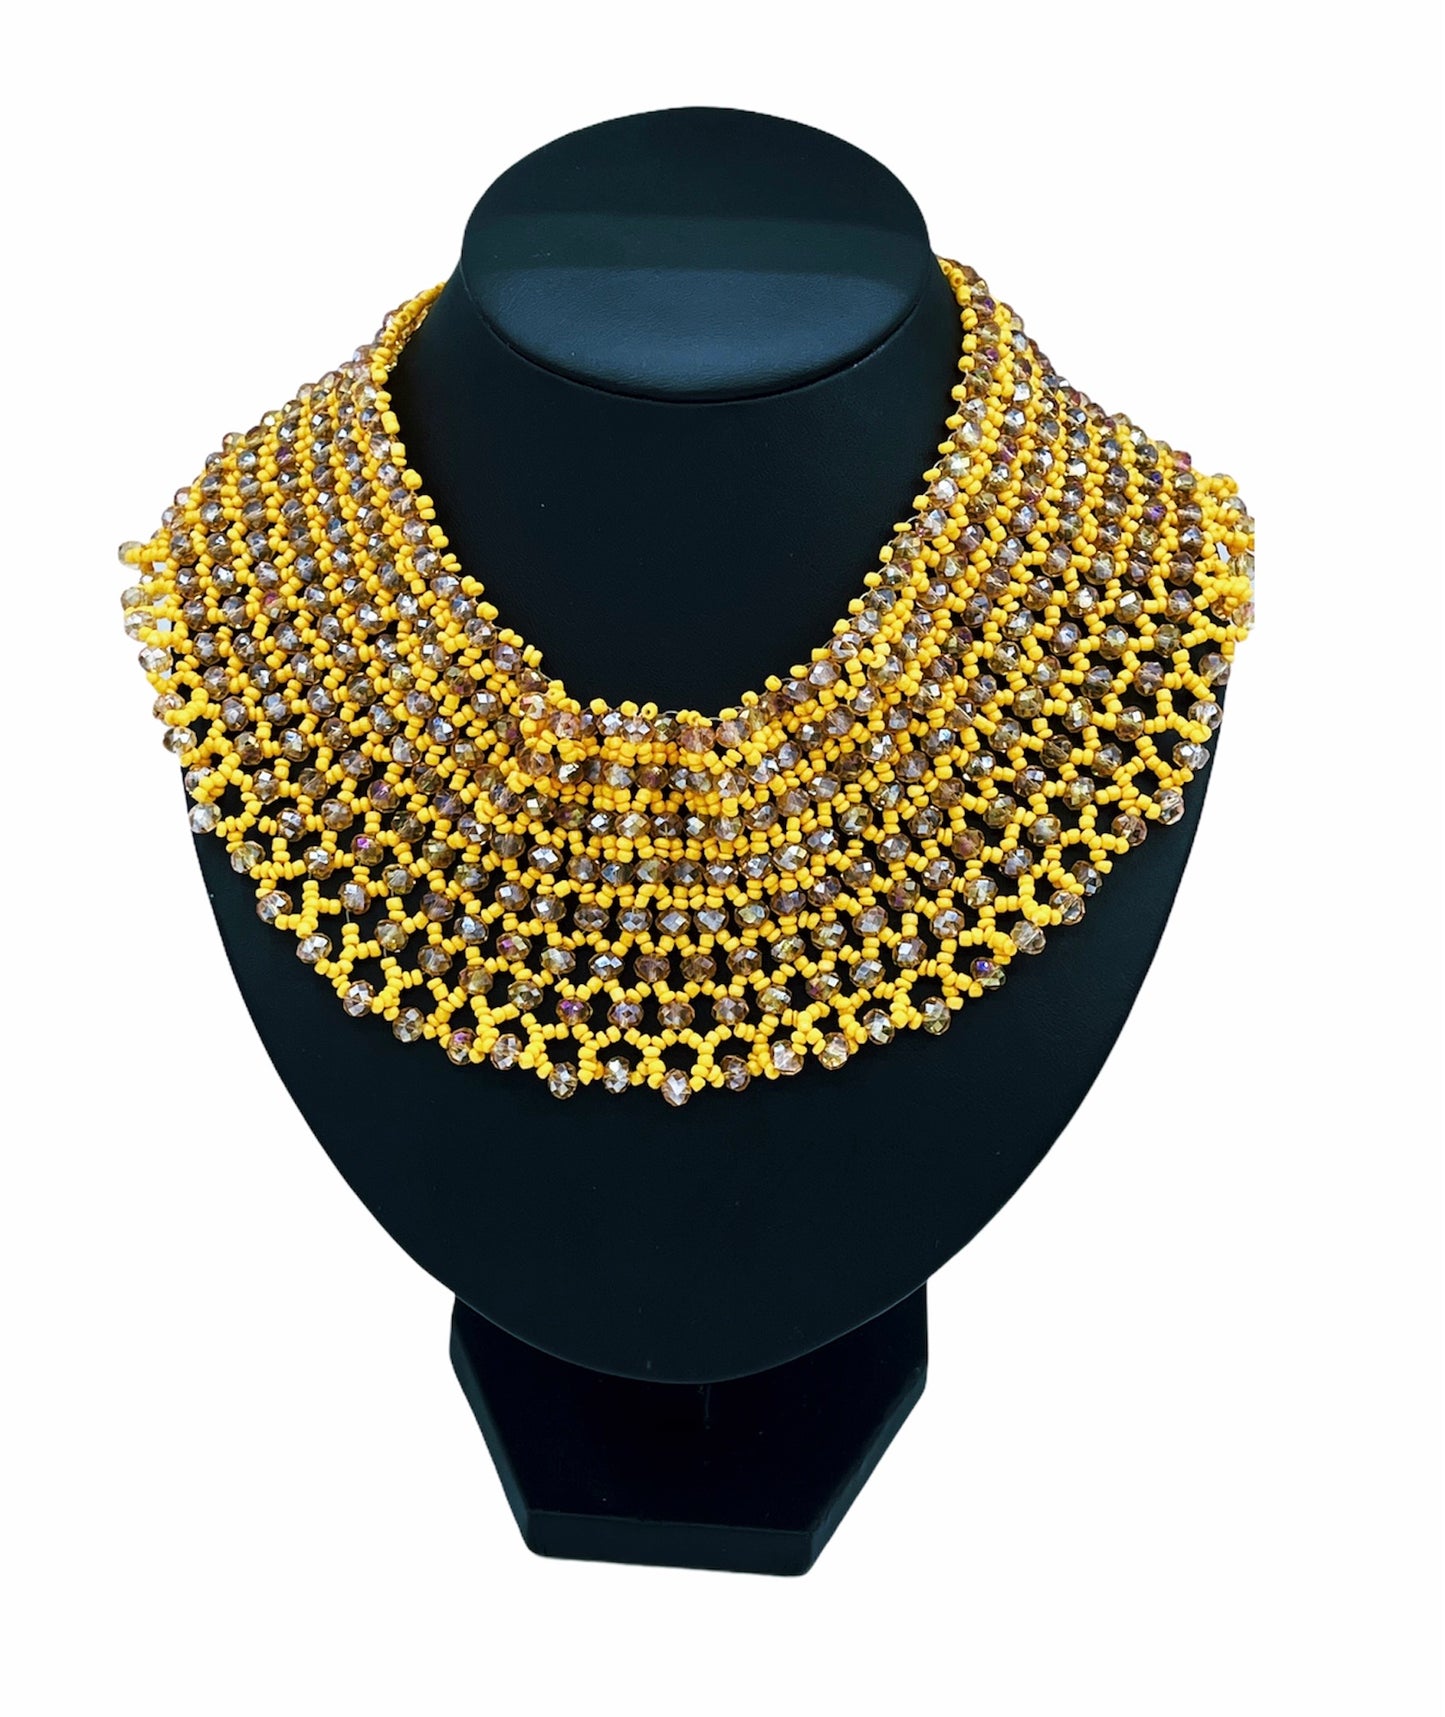 Cici Netting Yellow Necklace